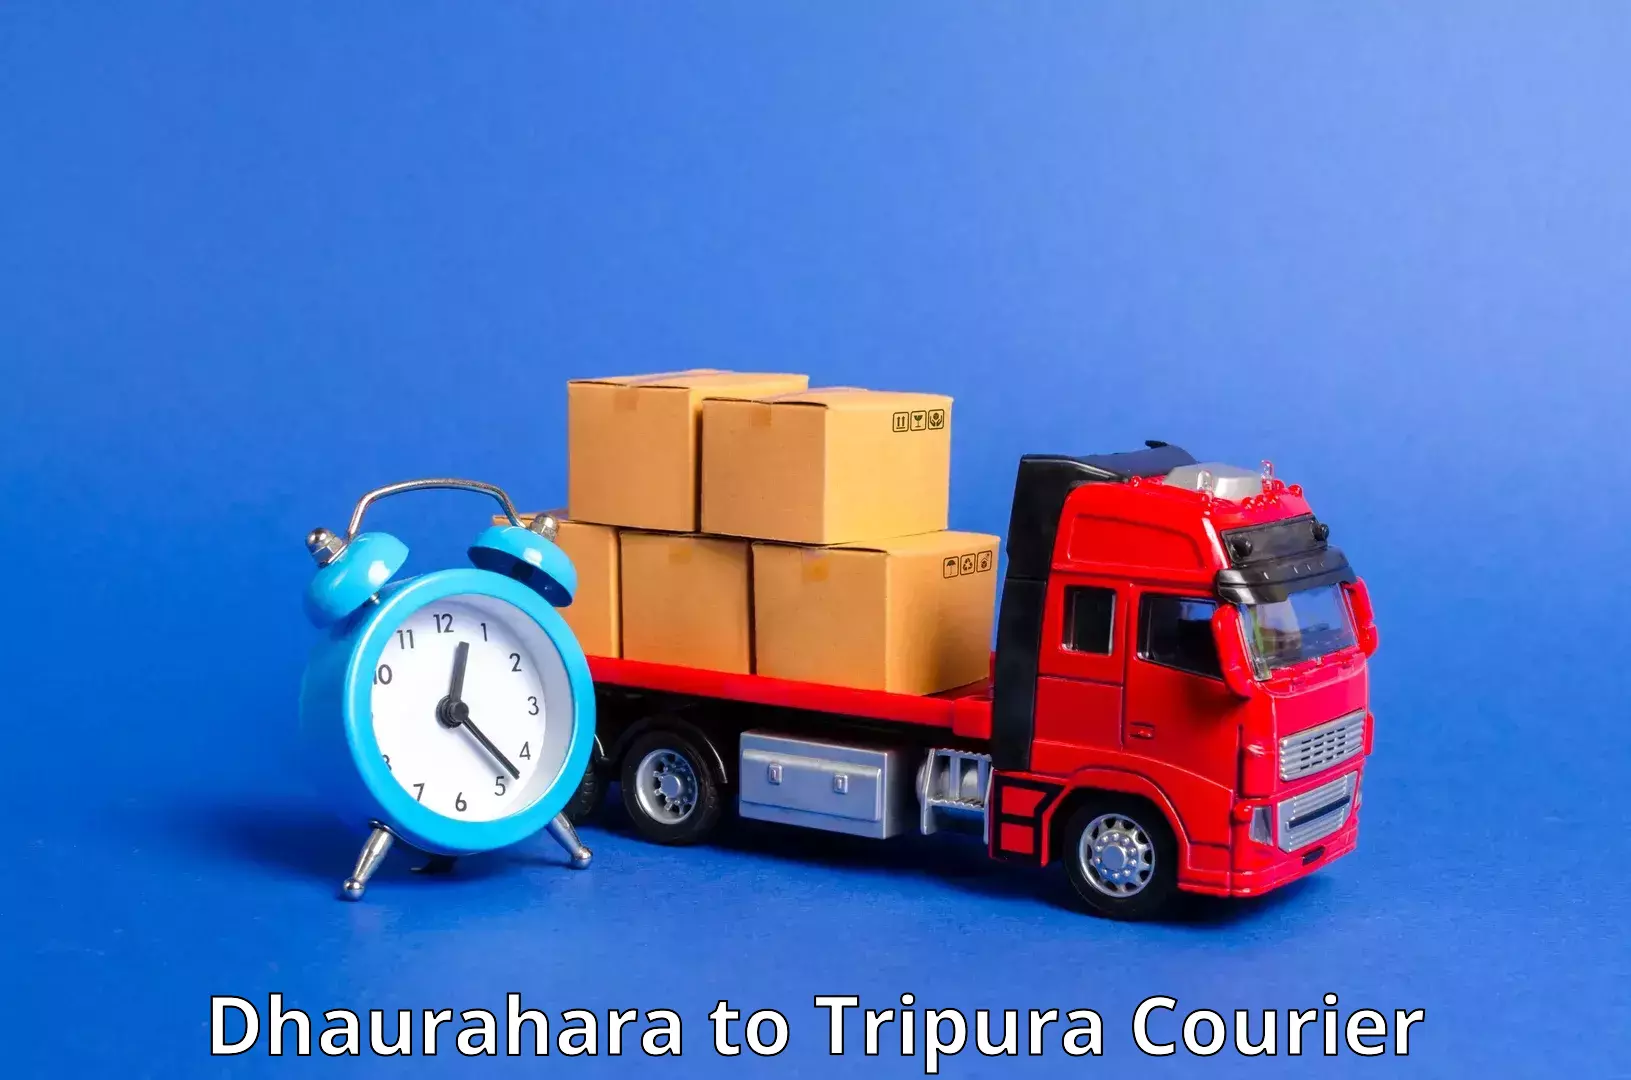 Parcel service for businesses in Dhaurahara to Khowai